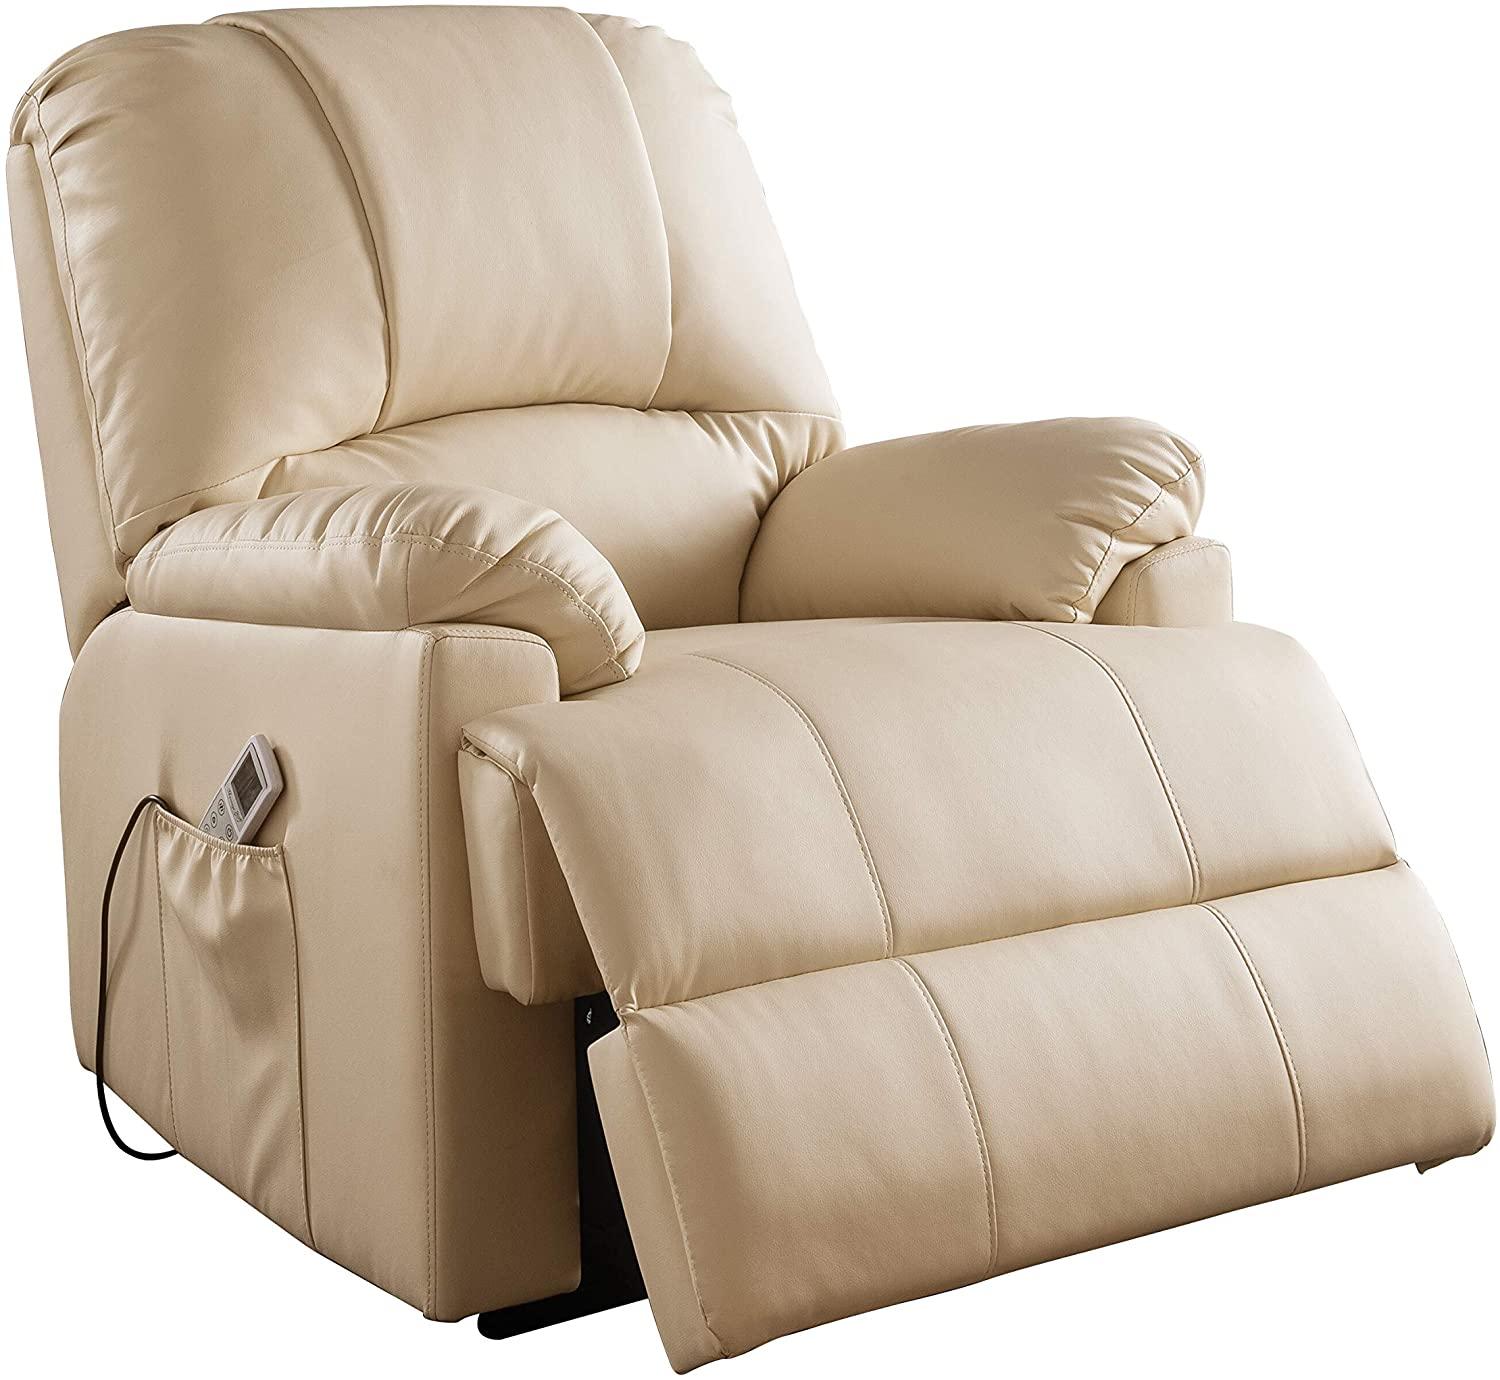 Contemporary Recliner Ixora 59286 in Beige Faux Leather